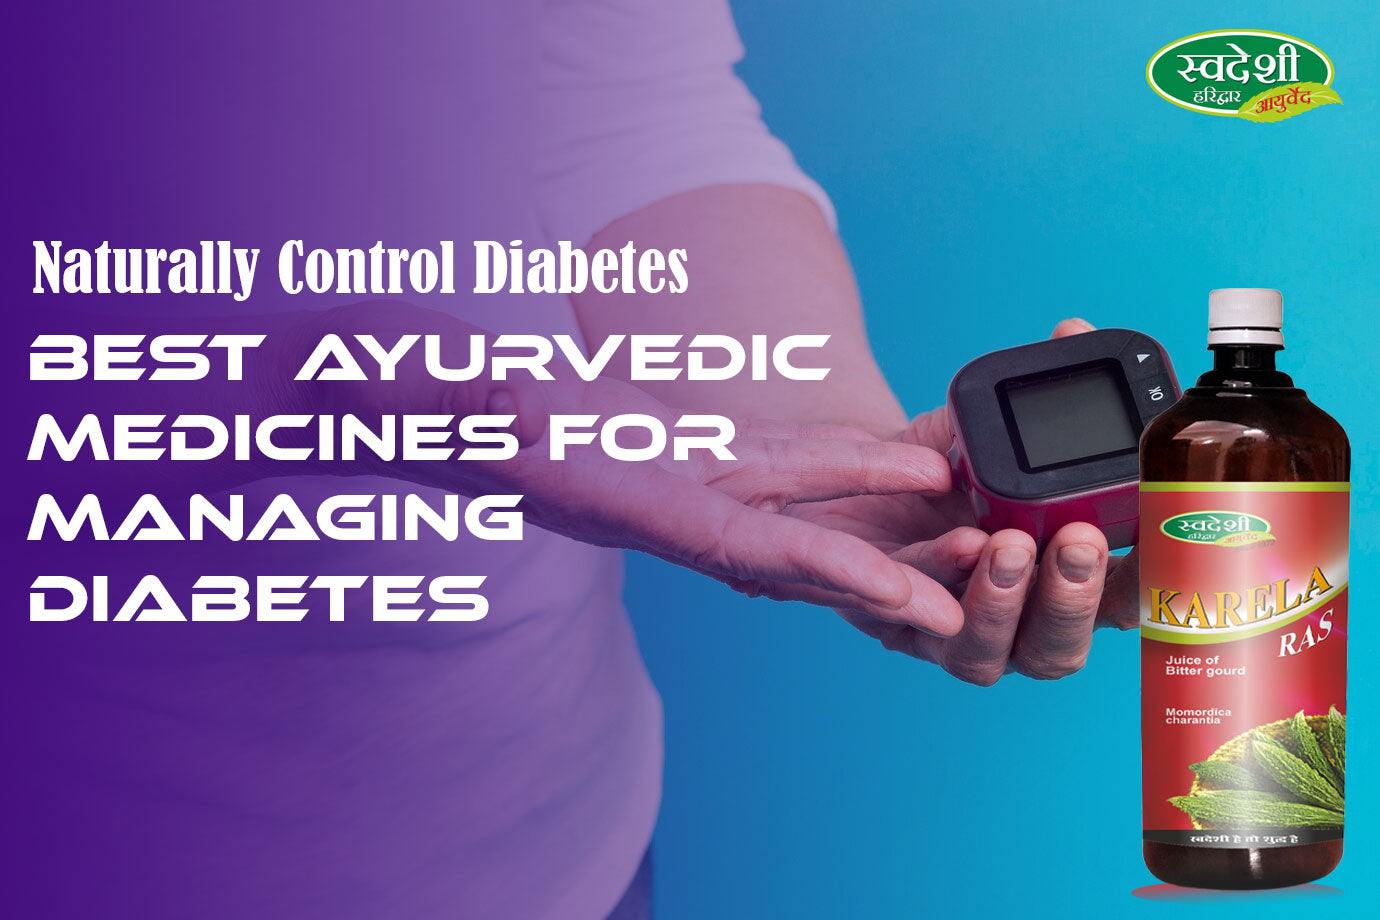 Naturally Control Diabetes: Discover the Best Ayurvedic Medicines for Managing Diabetes